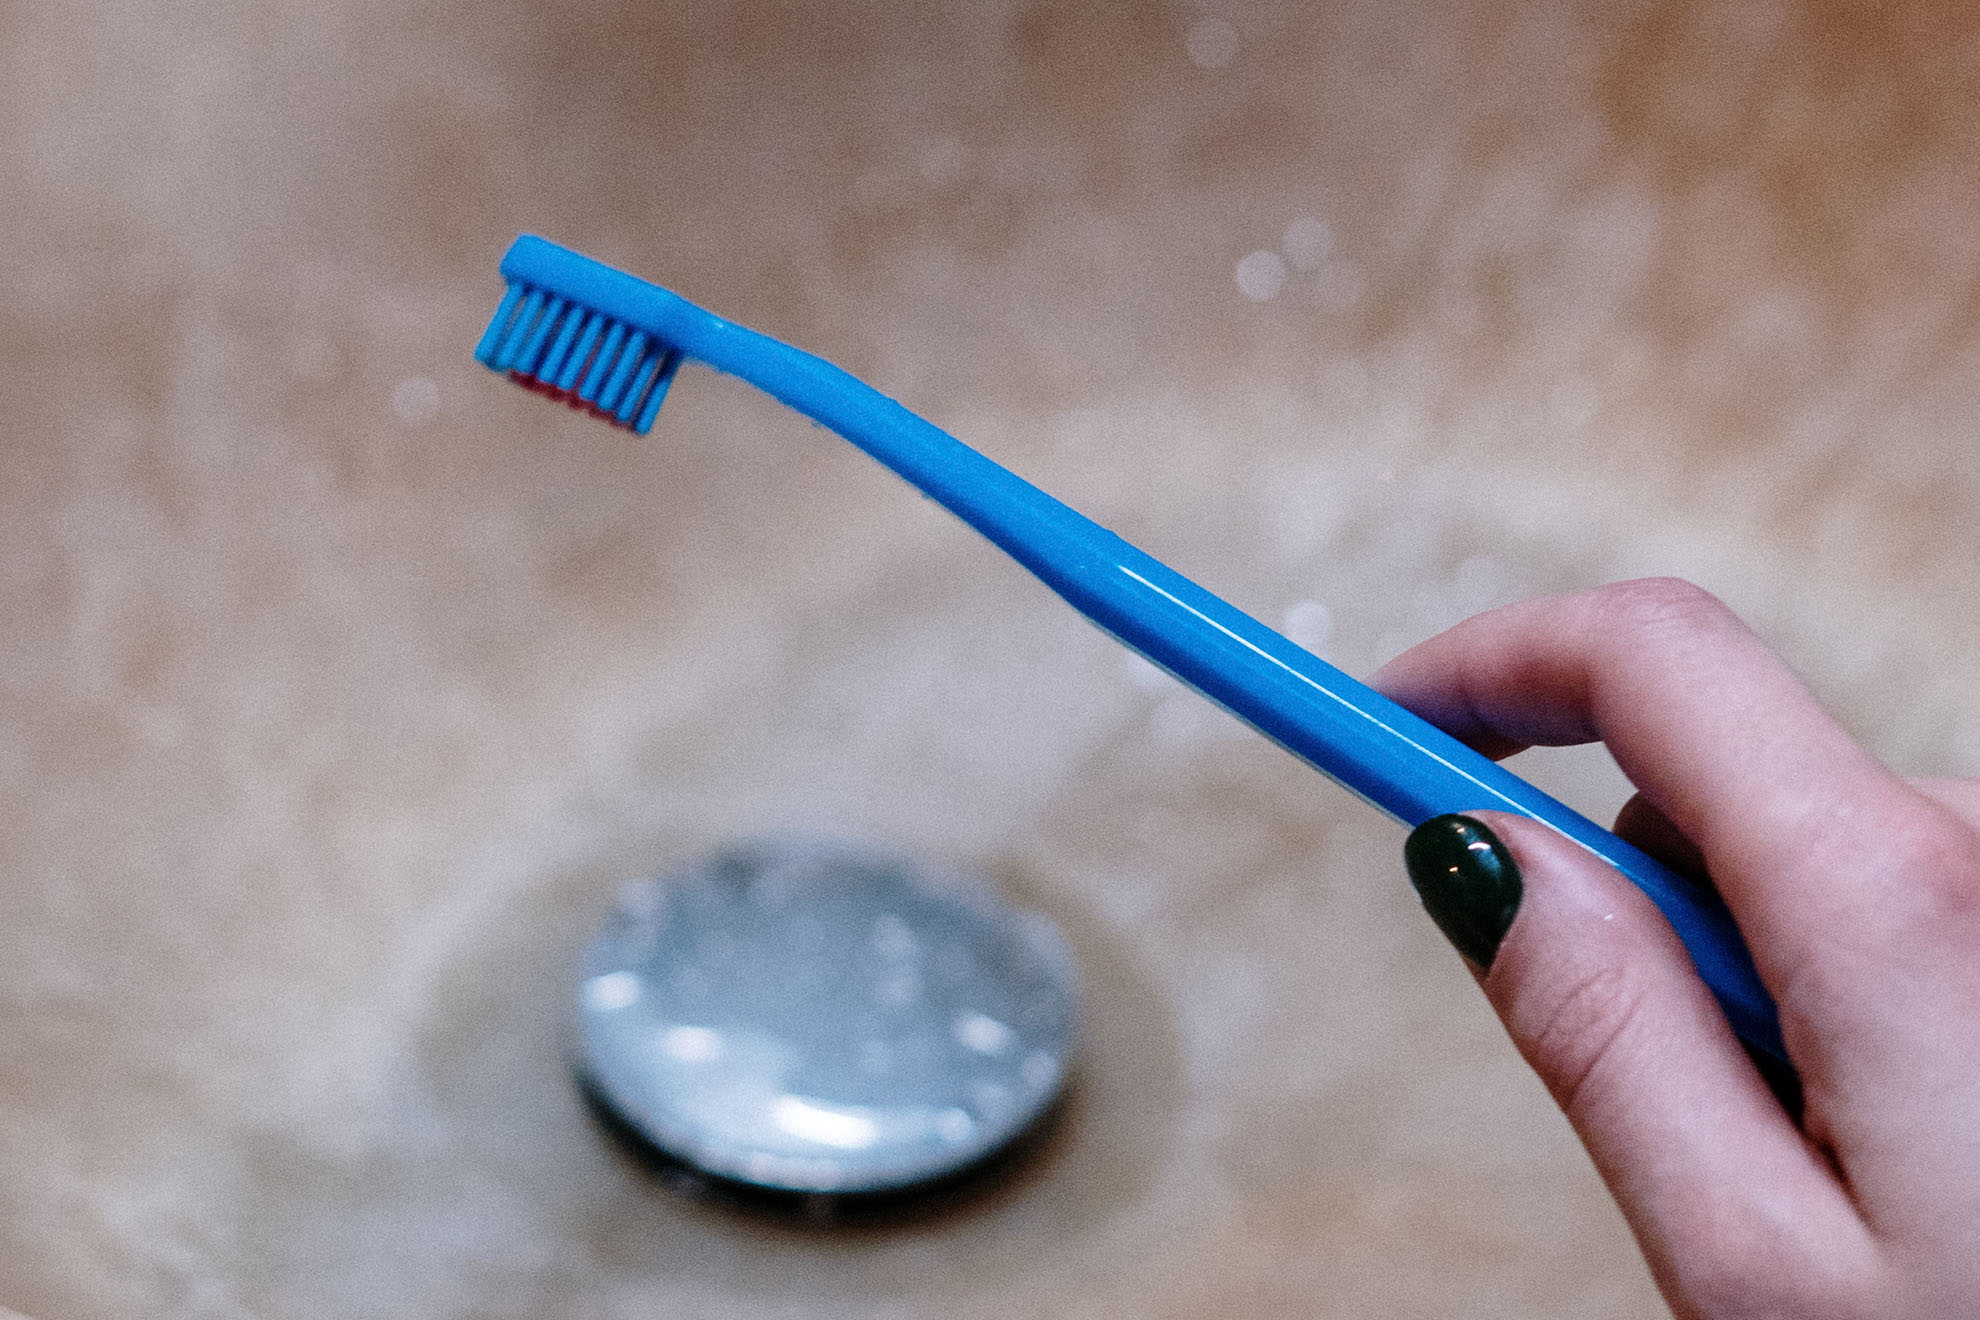 Facts of Plastic Toothbrush